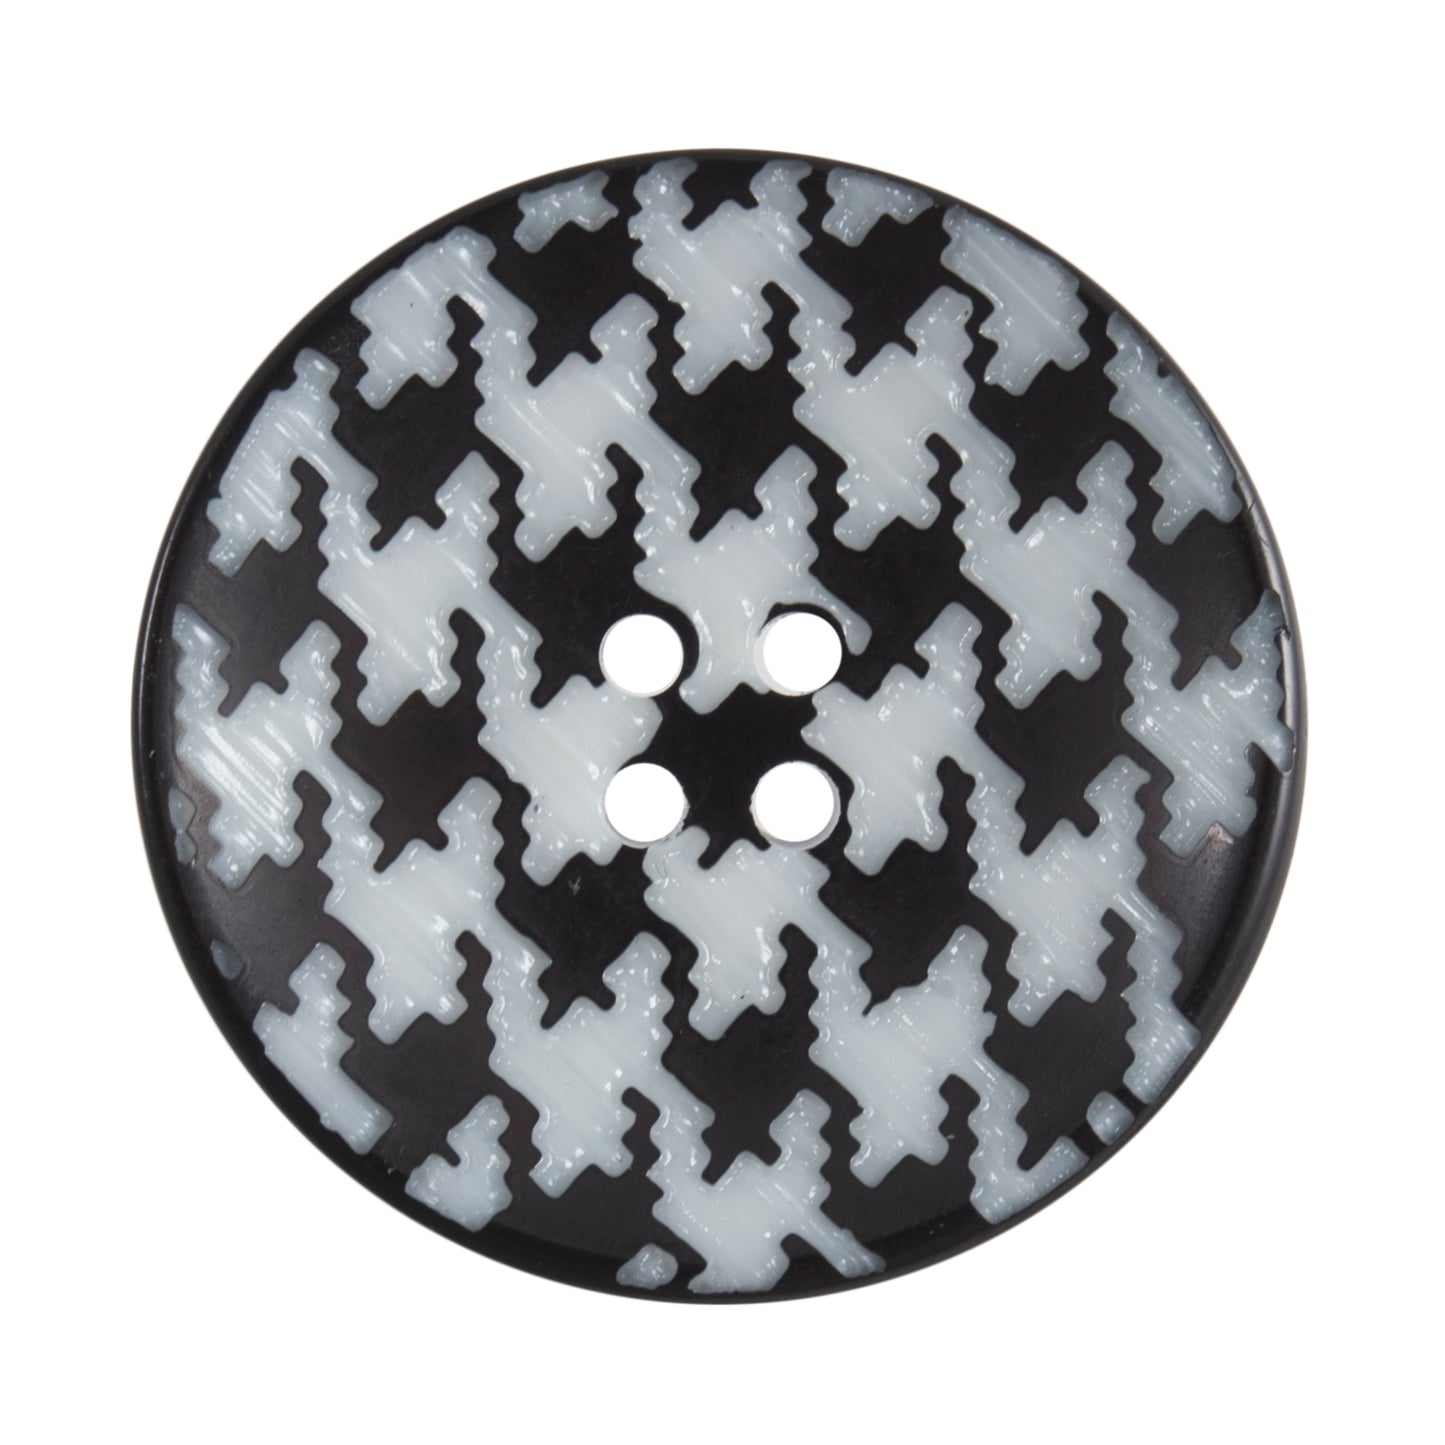 Black & White Patterned 4 Hole Button - 28mm